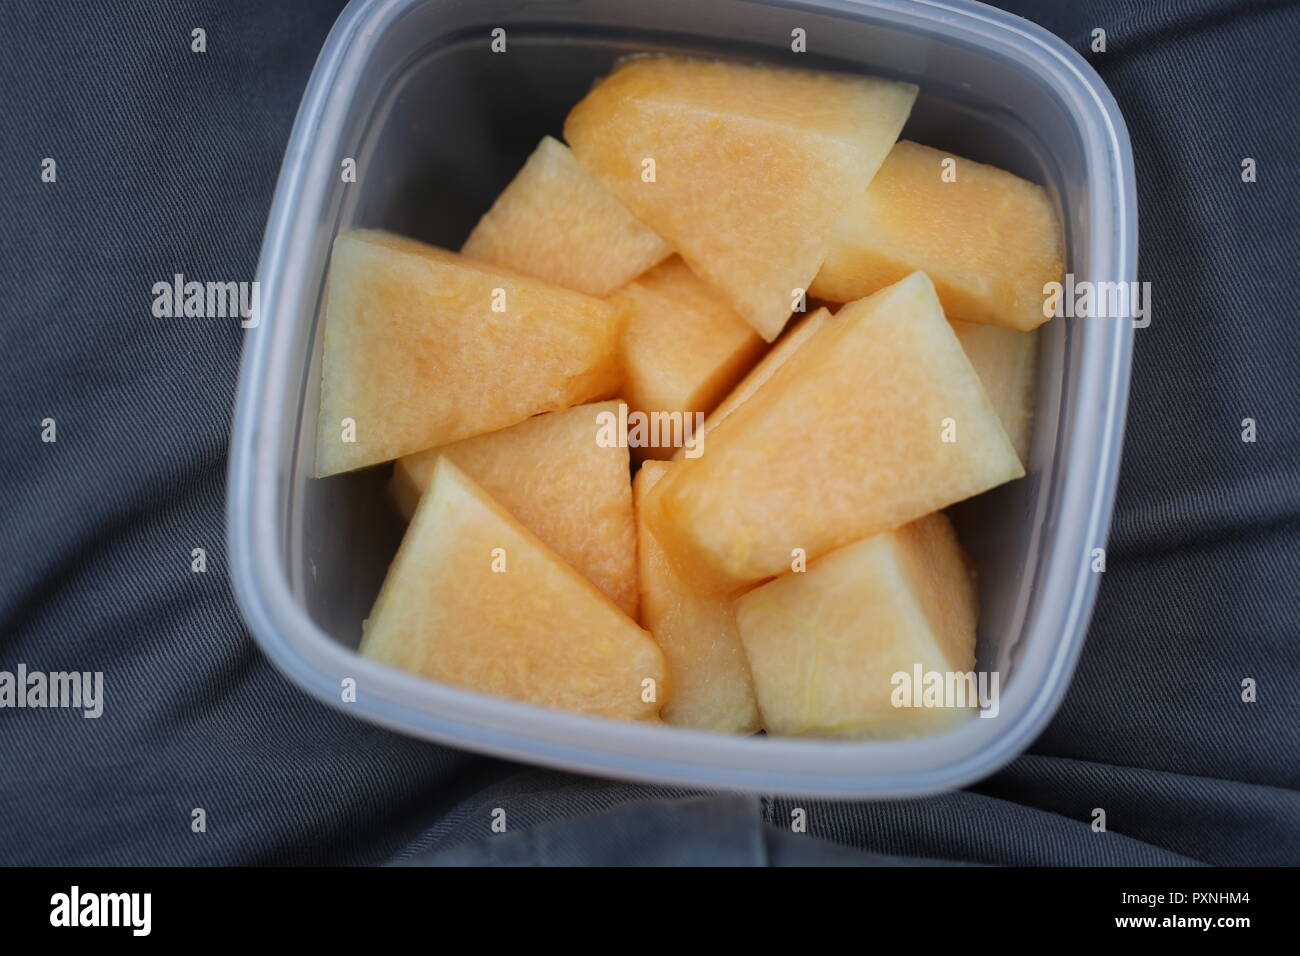 Melon Pieces. Fresh peeled pieces of melon in a plastic box on the knees, close up. Healthy snack on the way. Stock Photo